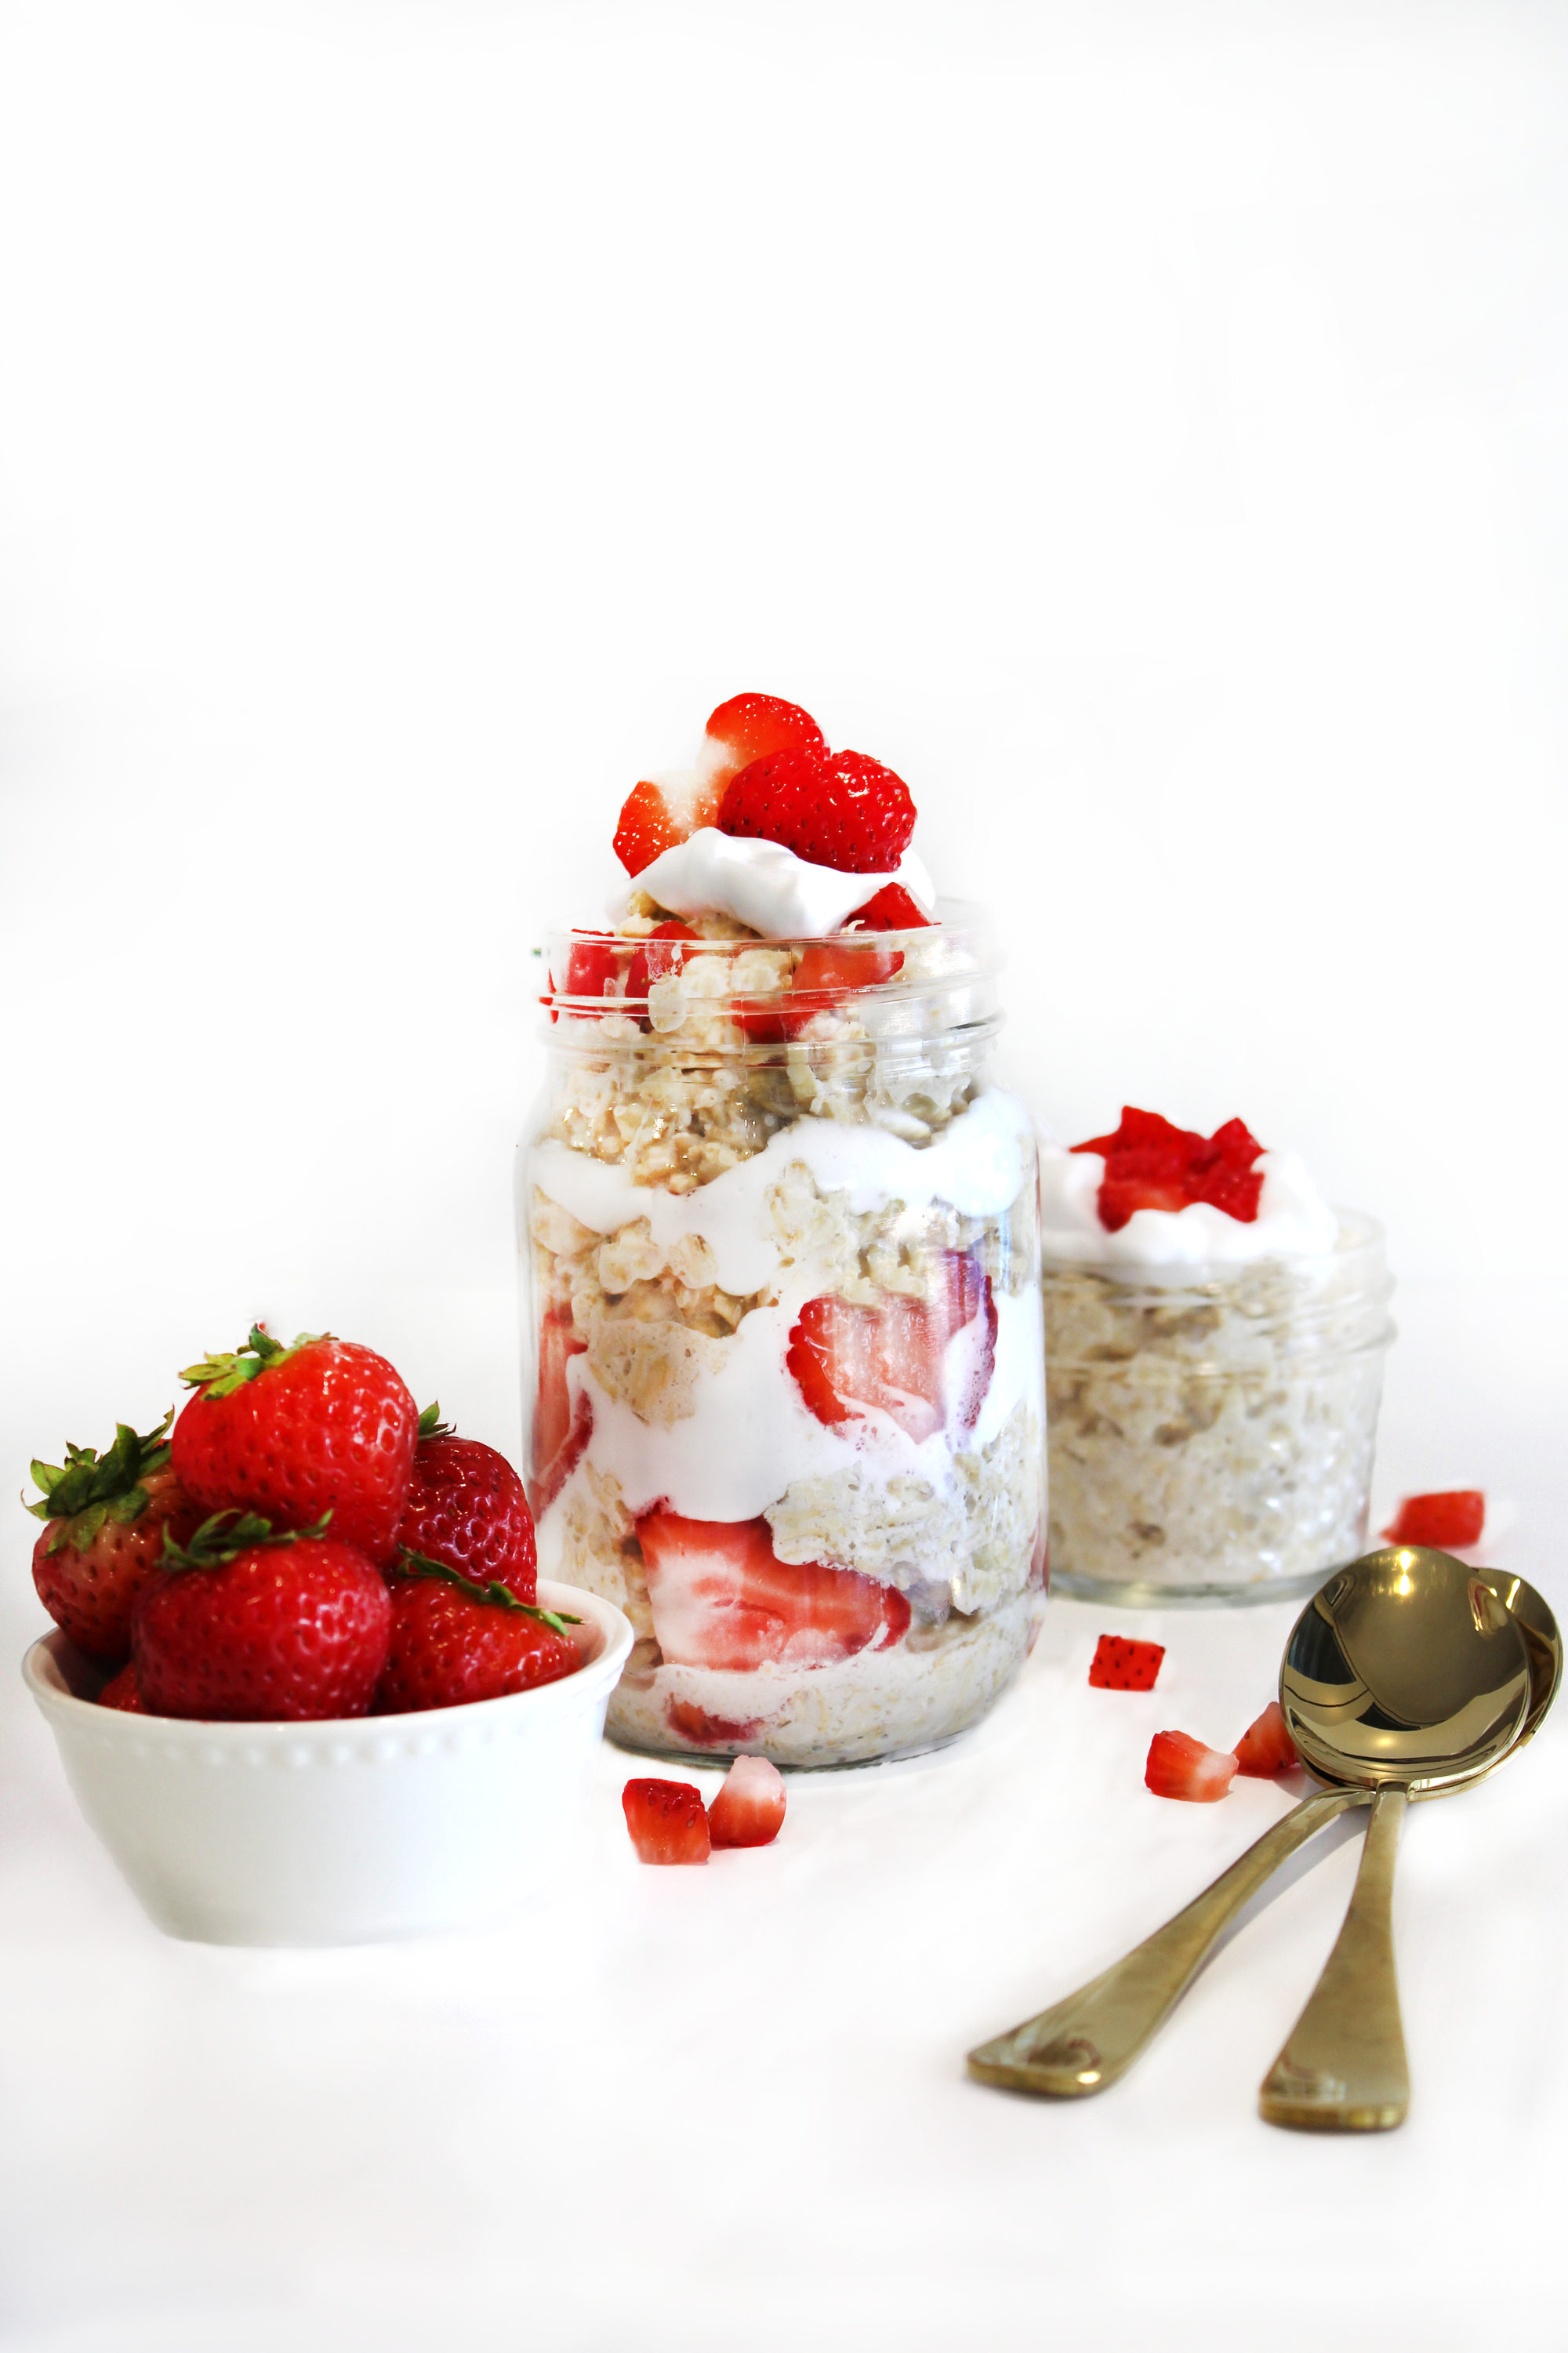 Strawberries and Cream Lactation Overnight Oats - Lacsnac